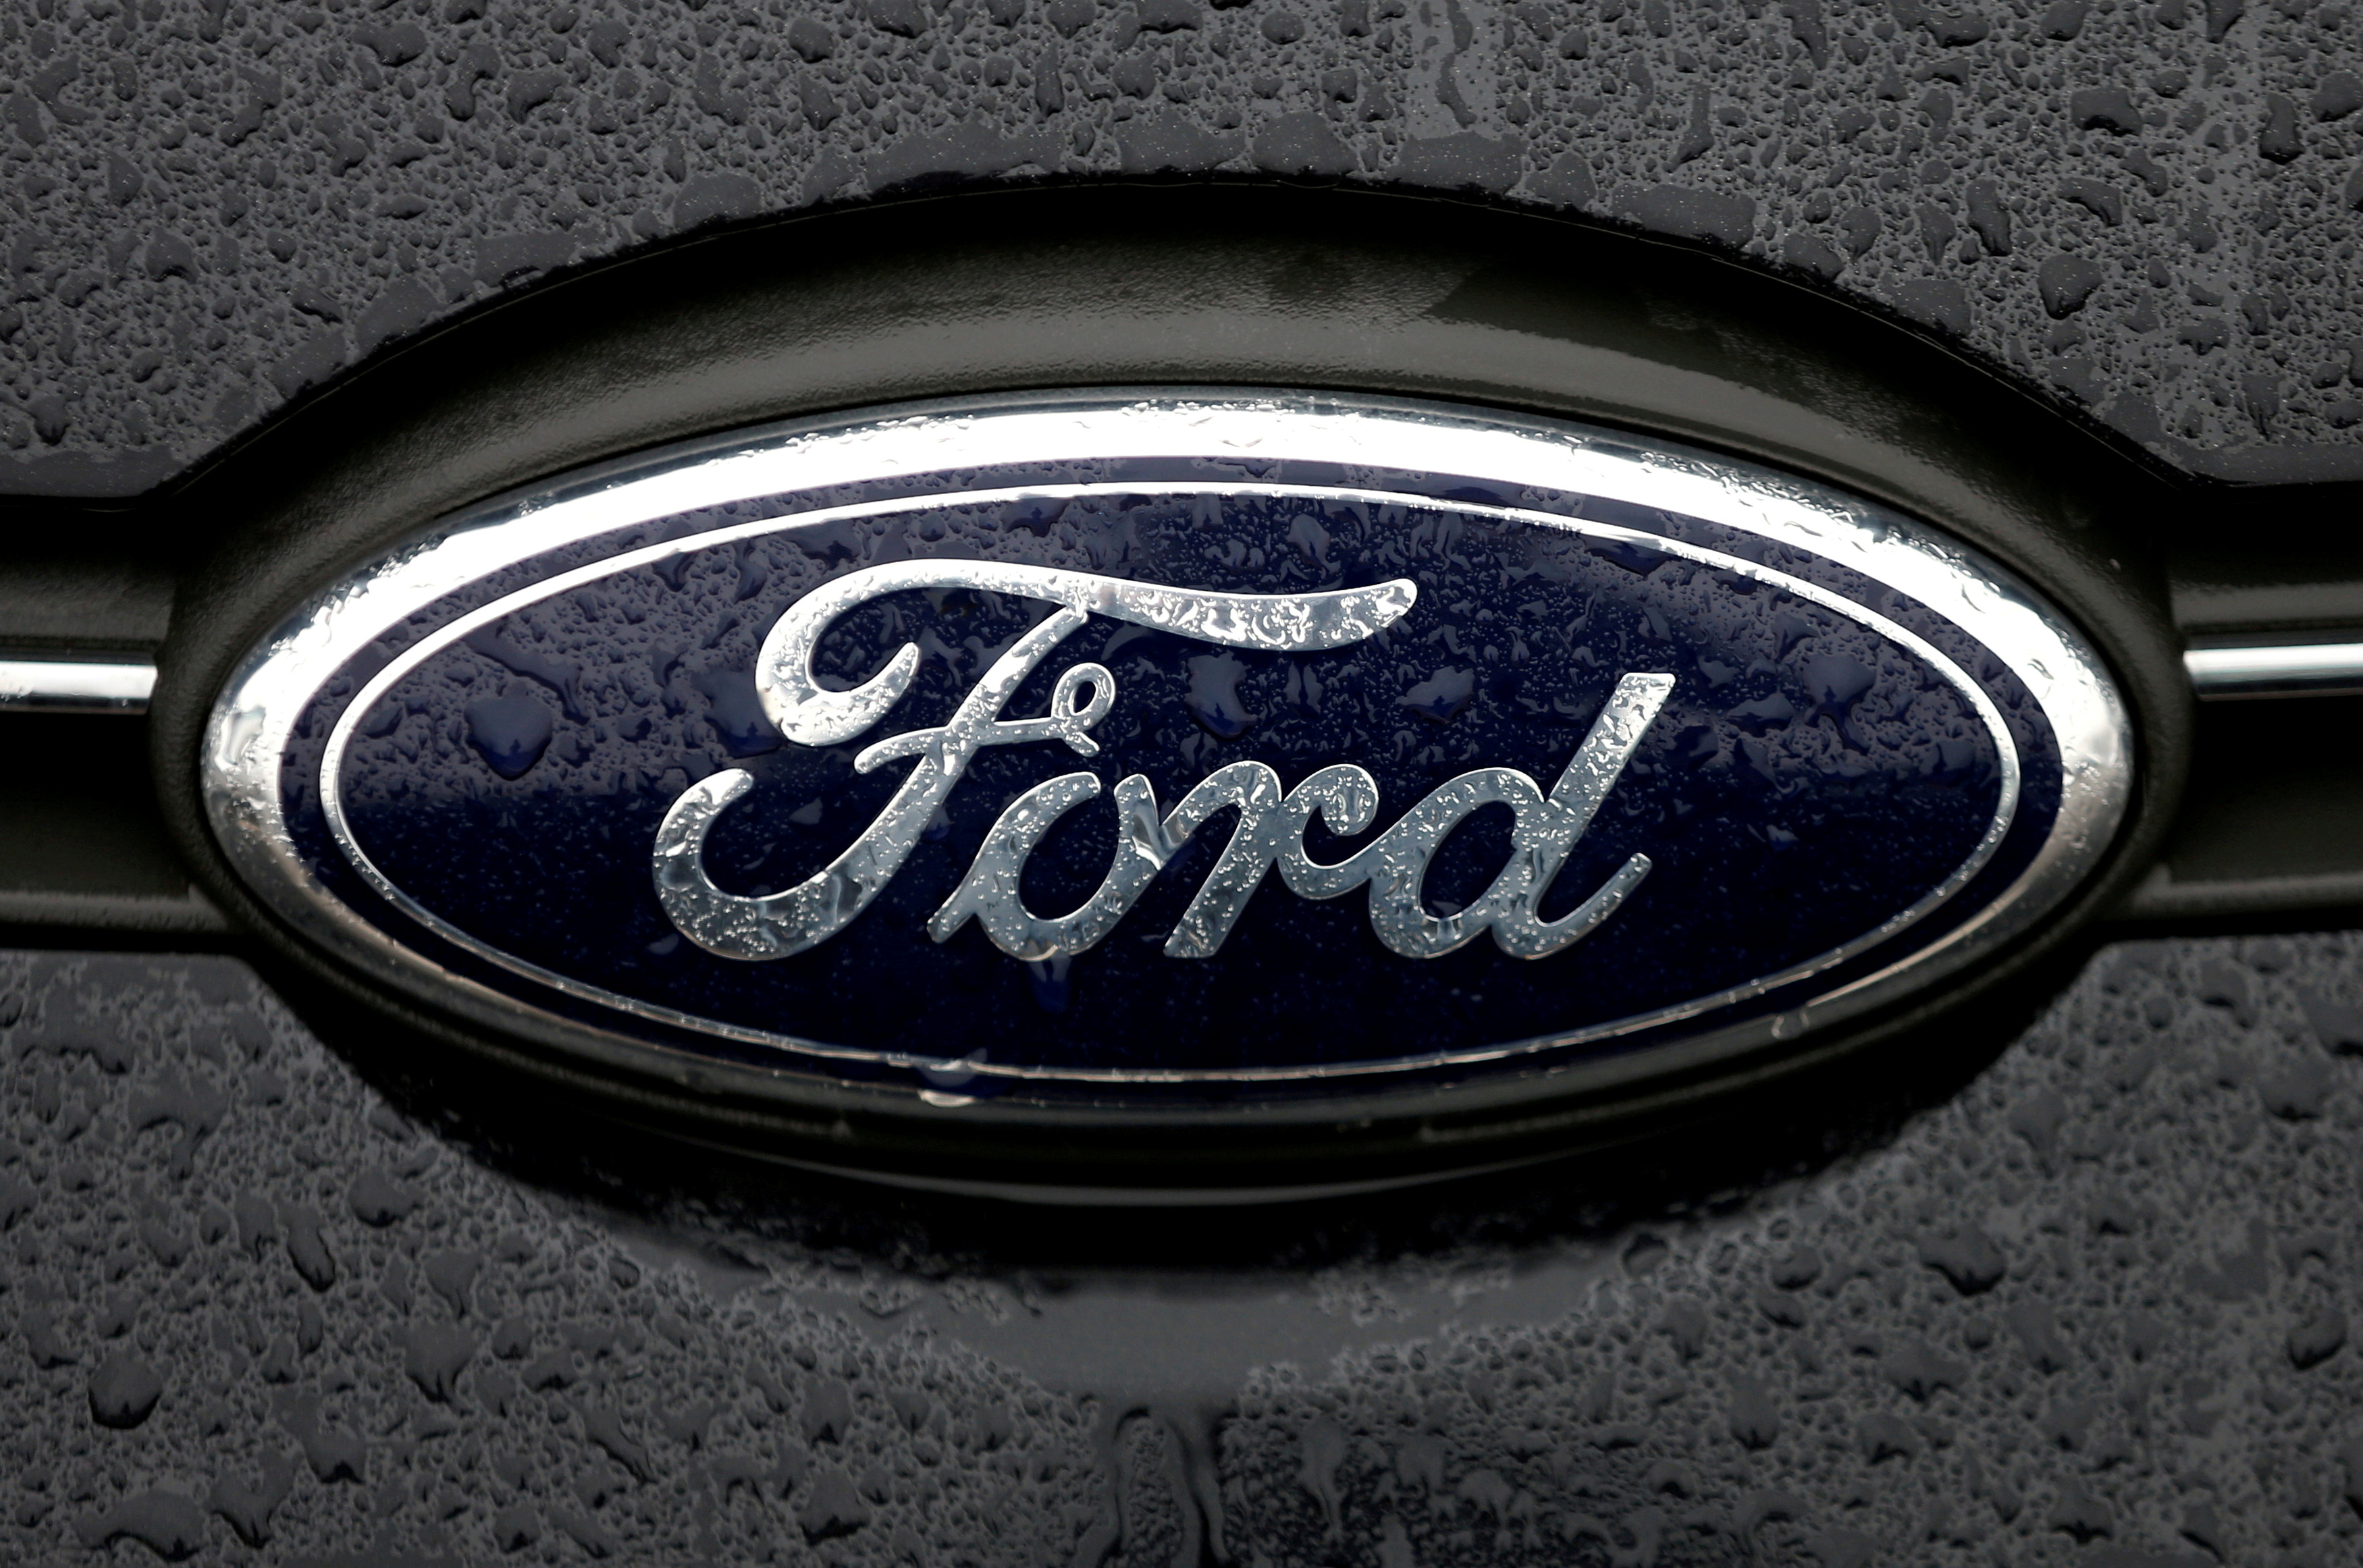 The Ford logo is pictured at the Ford Motor Co plant in Genk